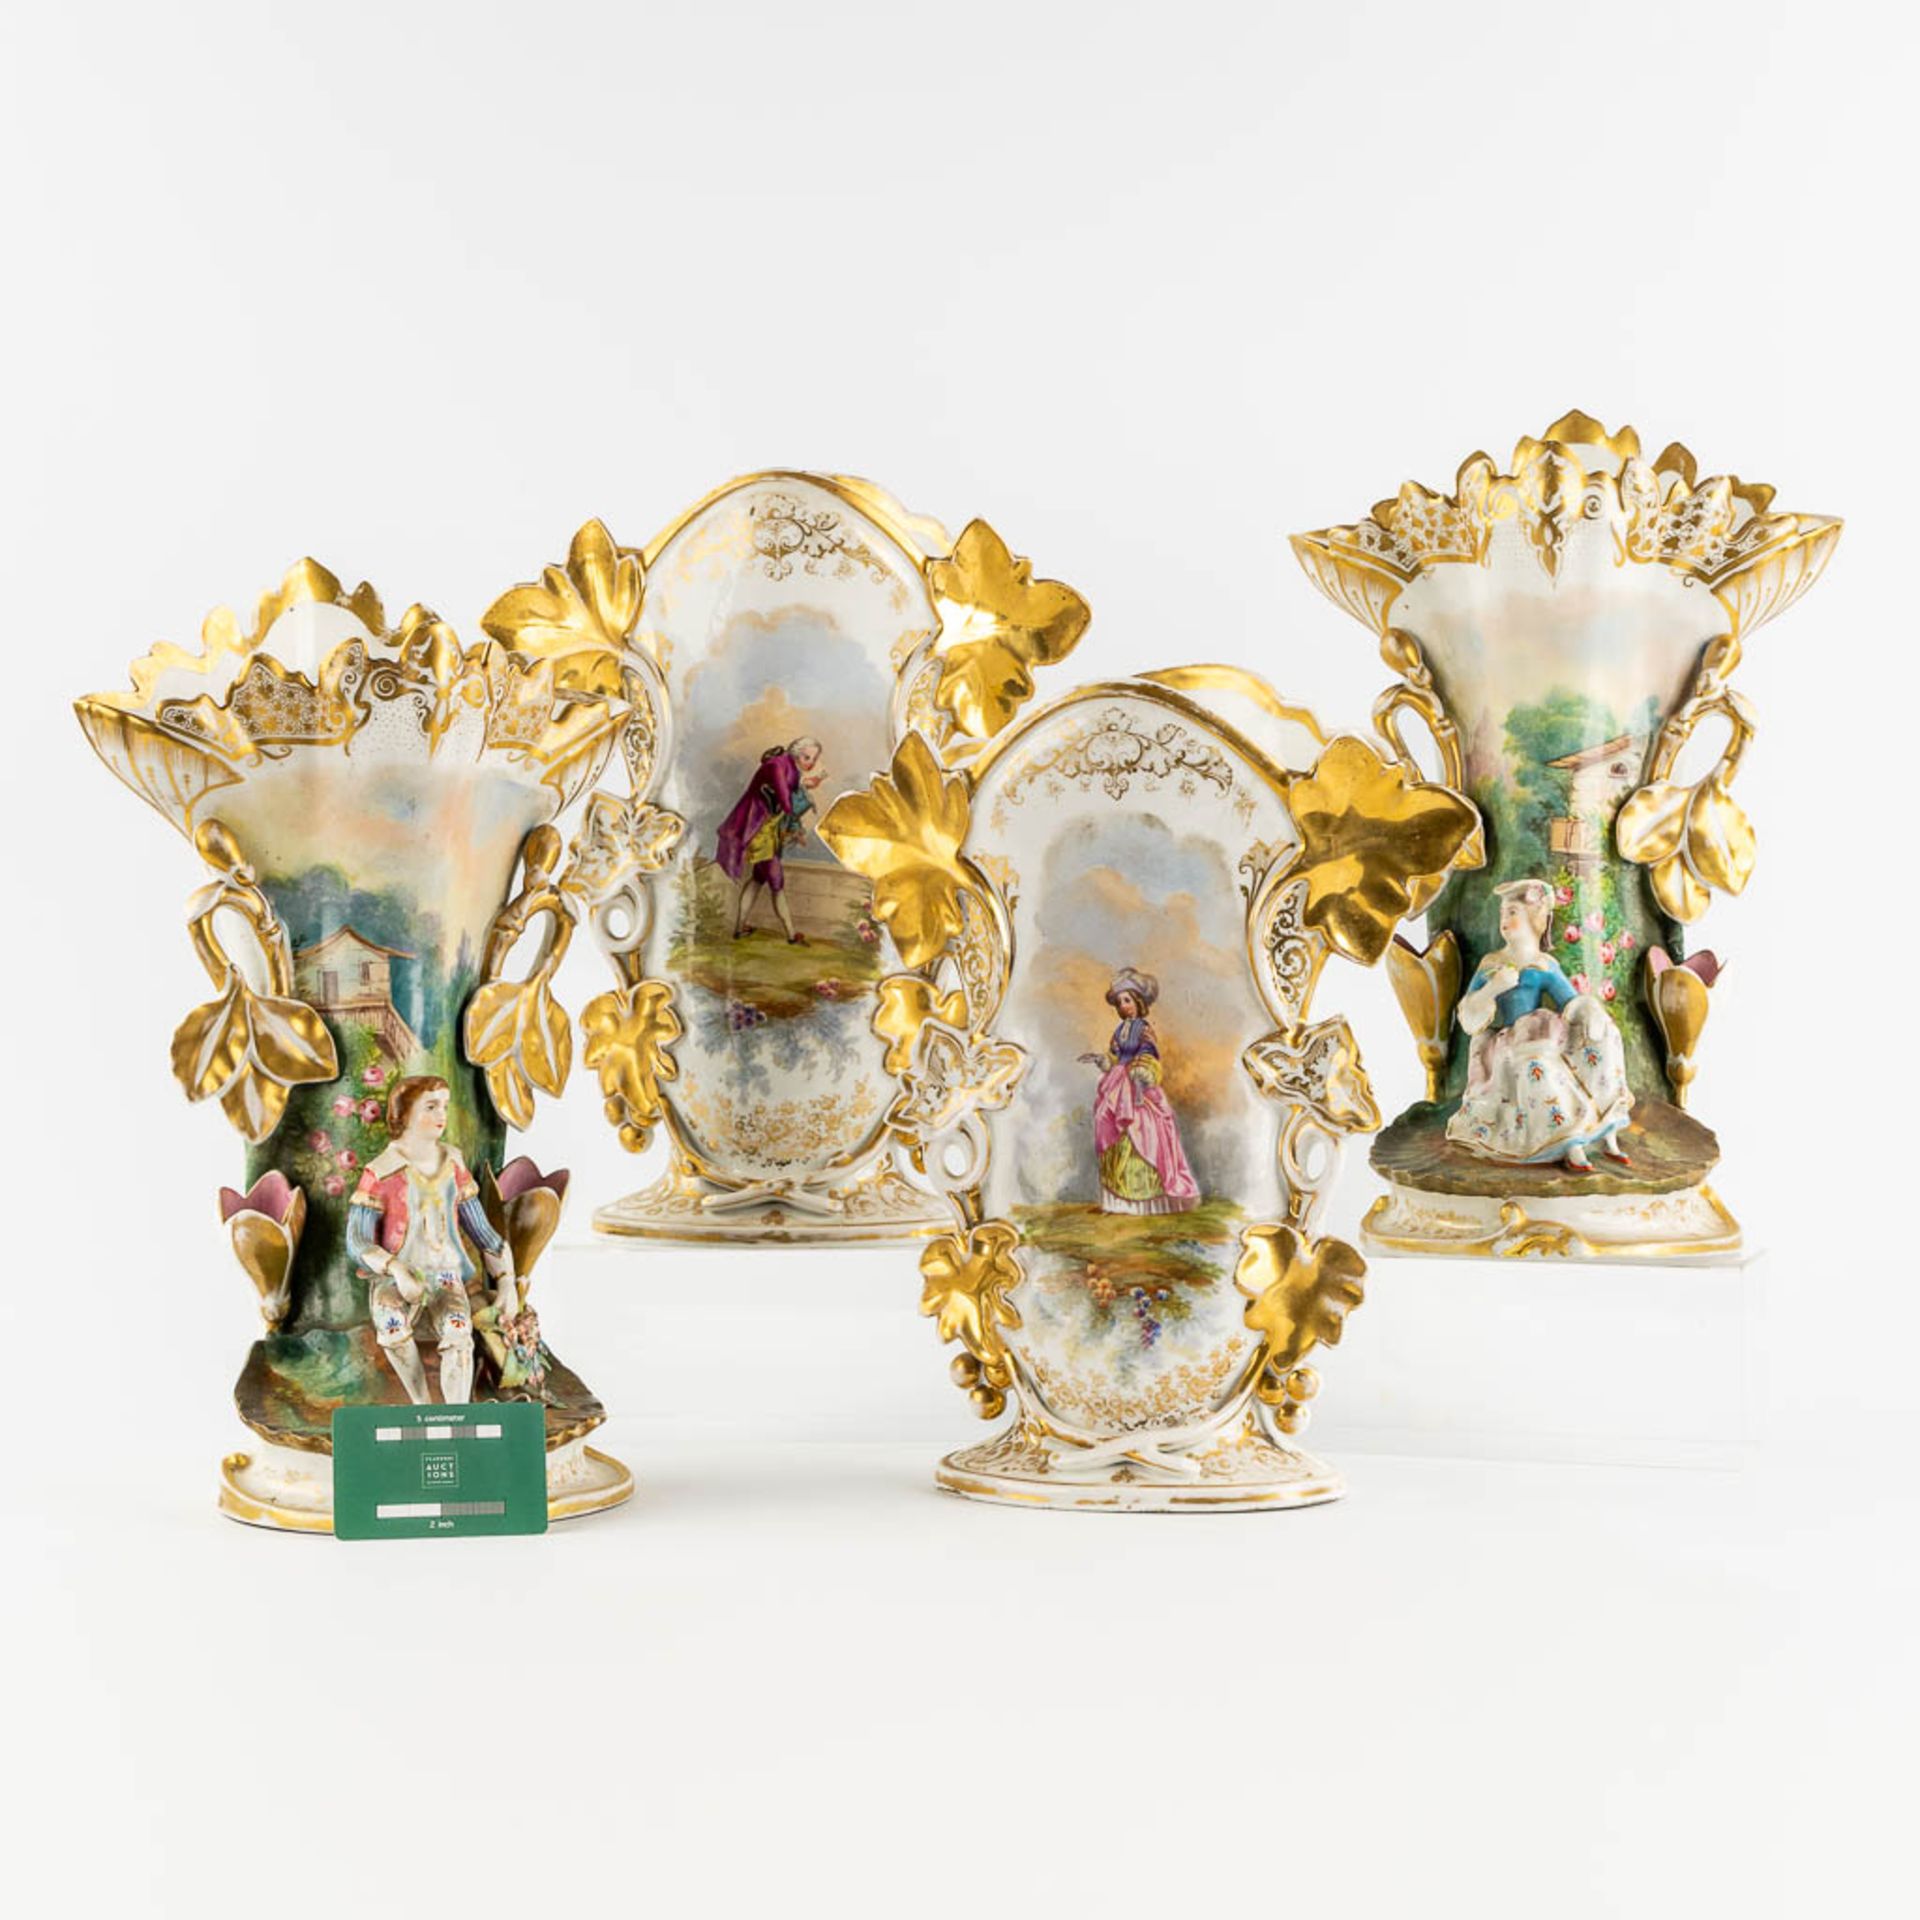 Two pair of Vieux Bruxelles vases, decorated with flowers and figurines. (L:20 x W:26 x H:39 cm) - Bild 2 aus 19